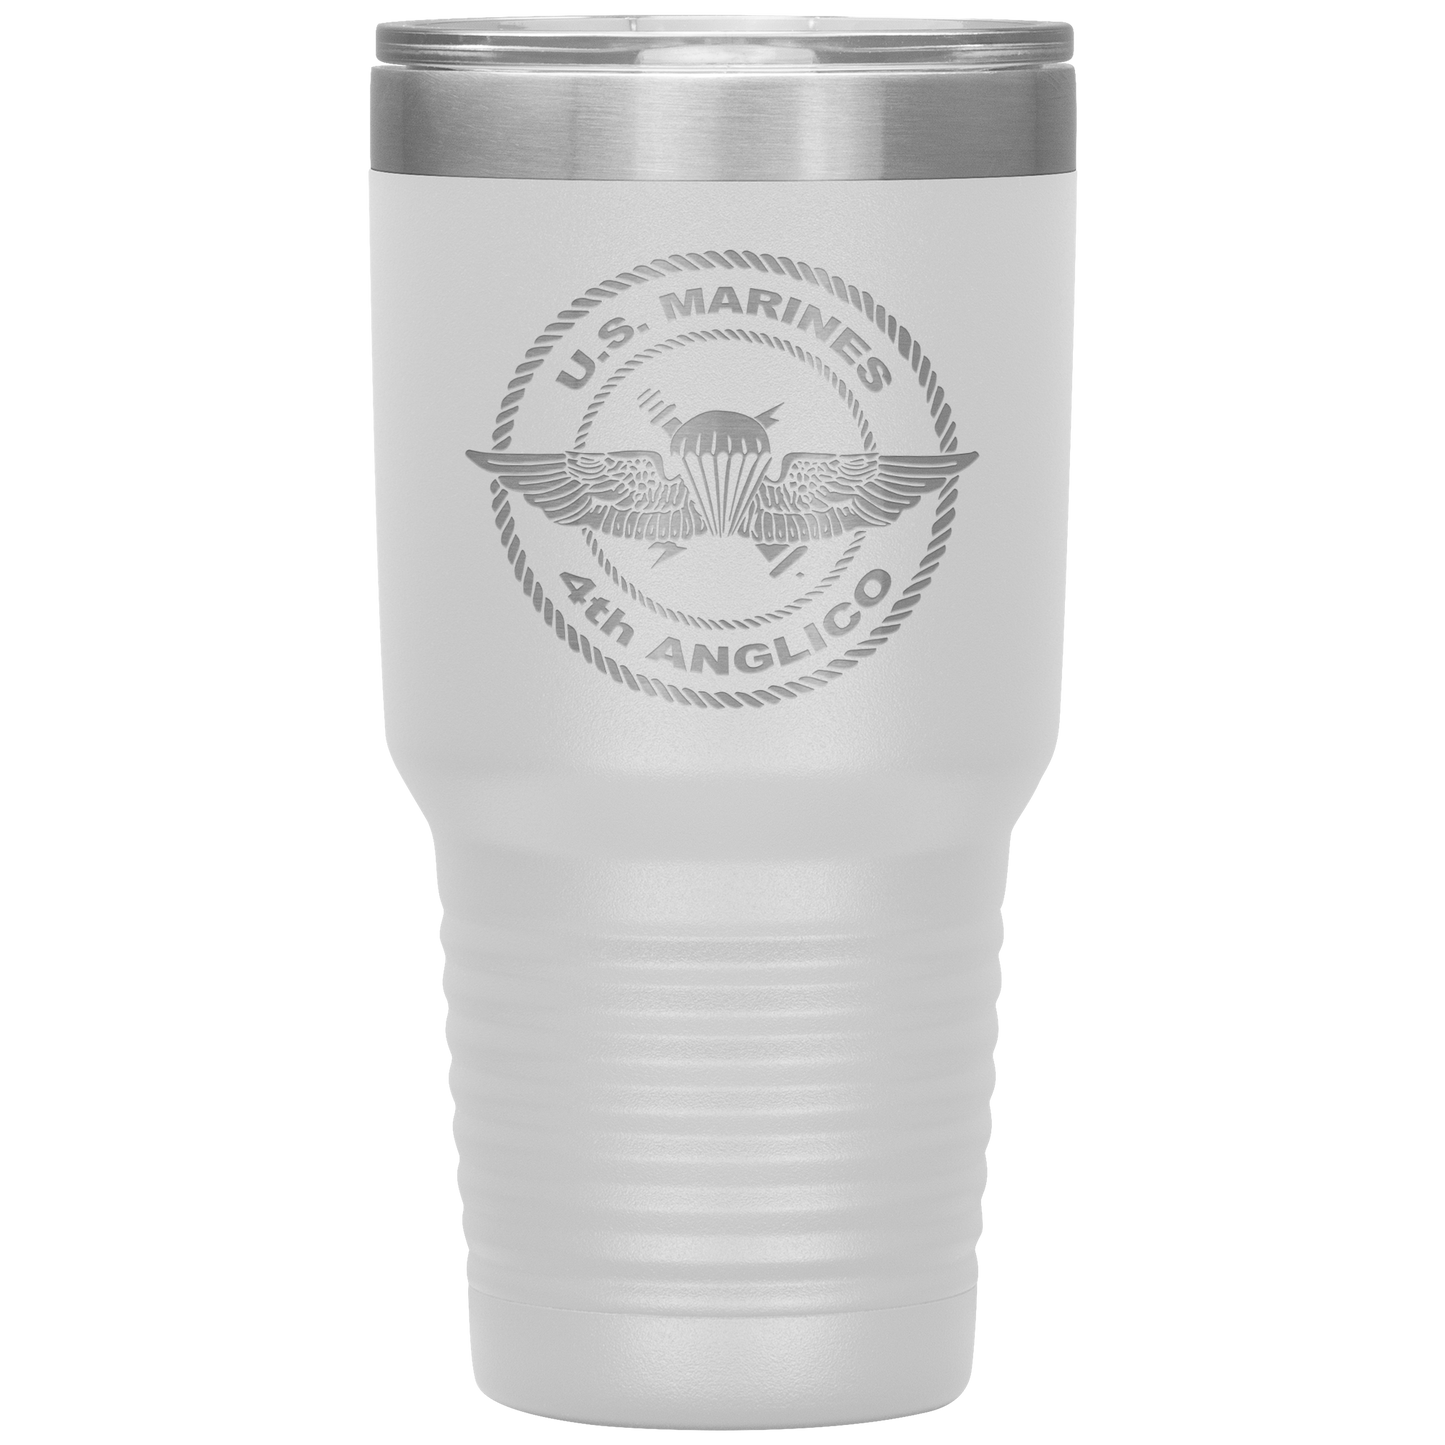 4th ANGLICO Crest Tumbler